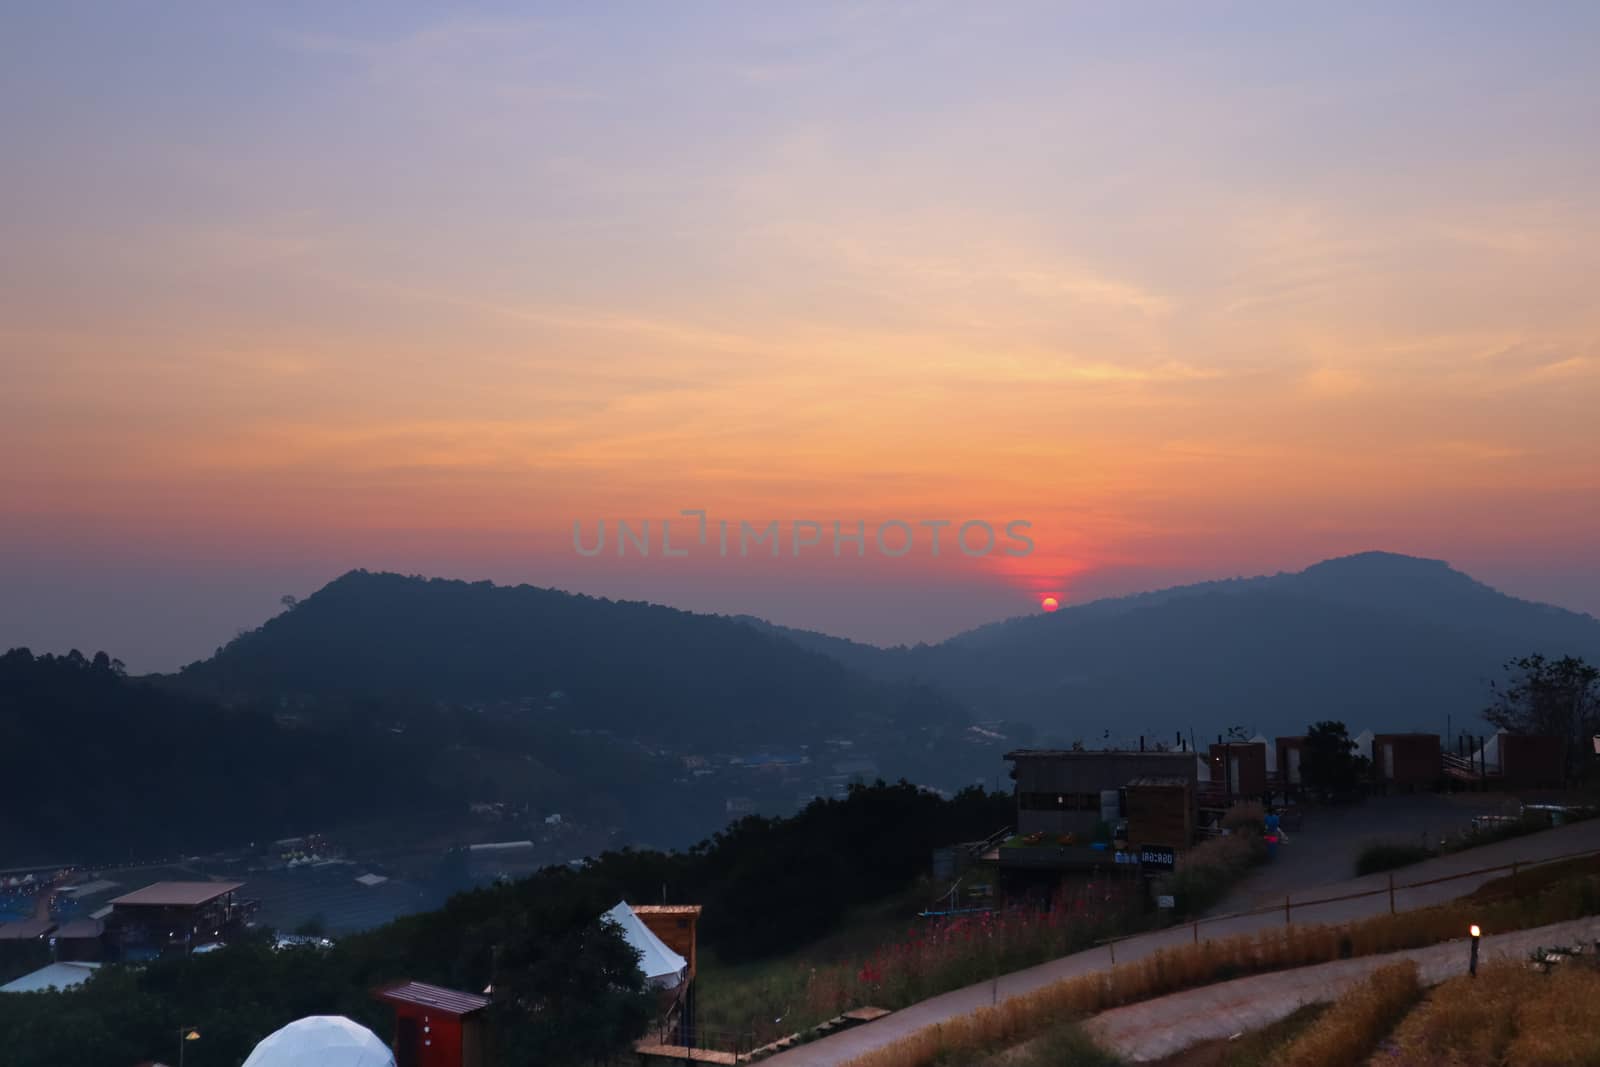 Majestic sunset in the mountains in Chiang Mai, Thailand. The mountain scenery view